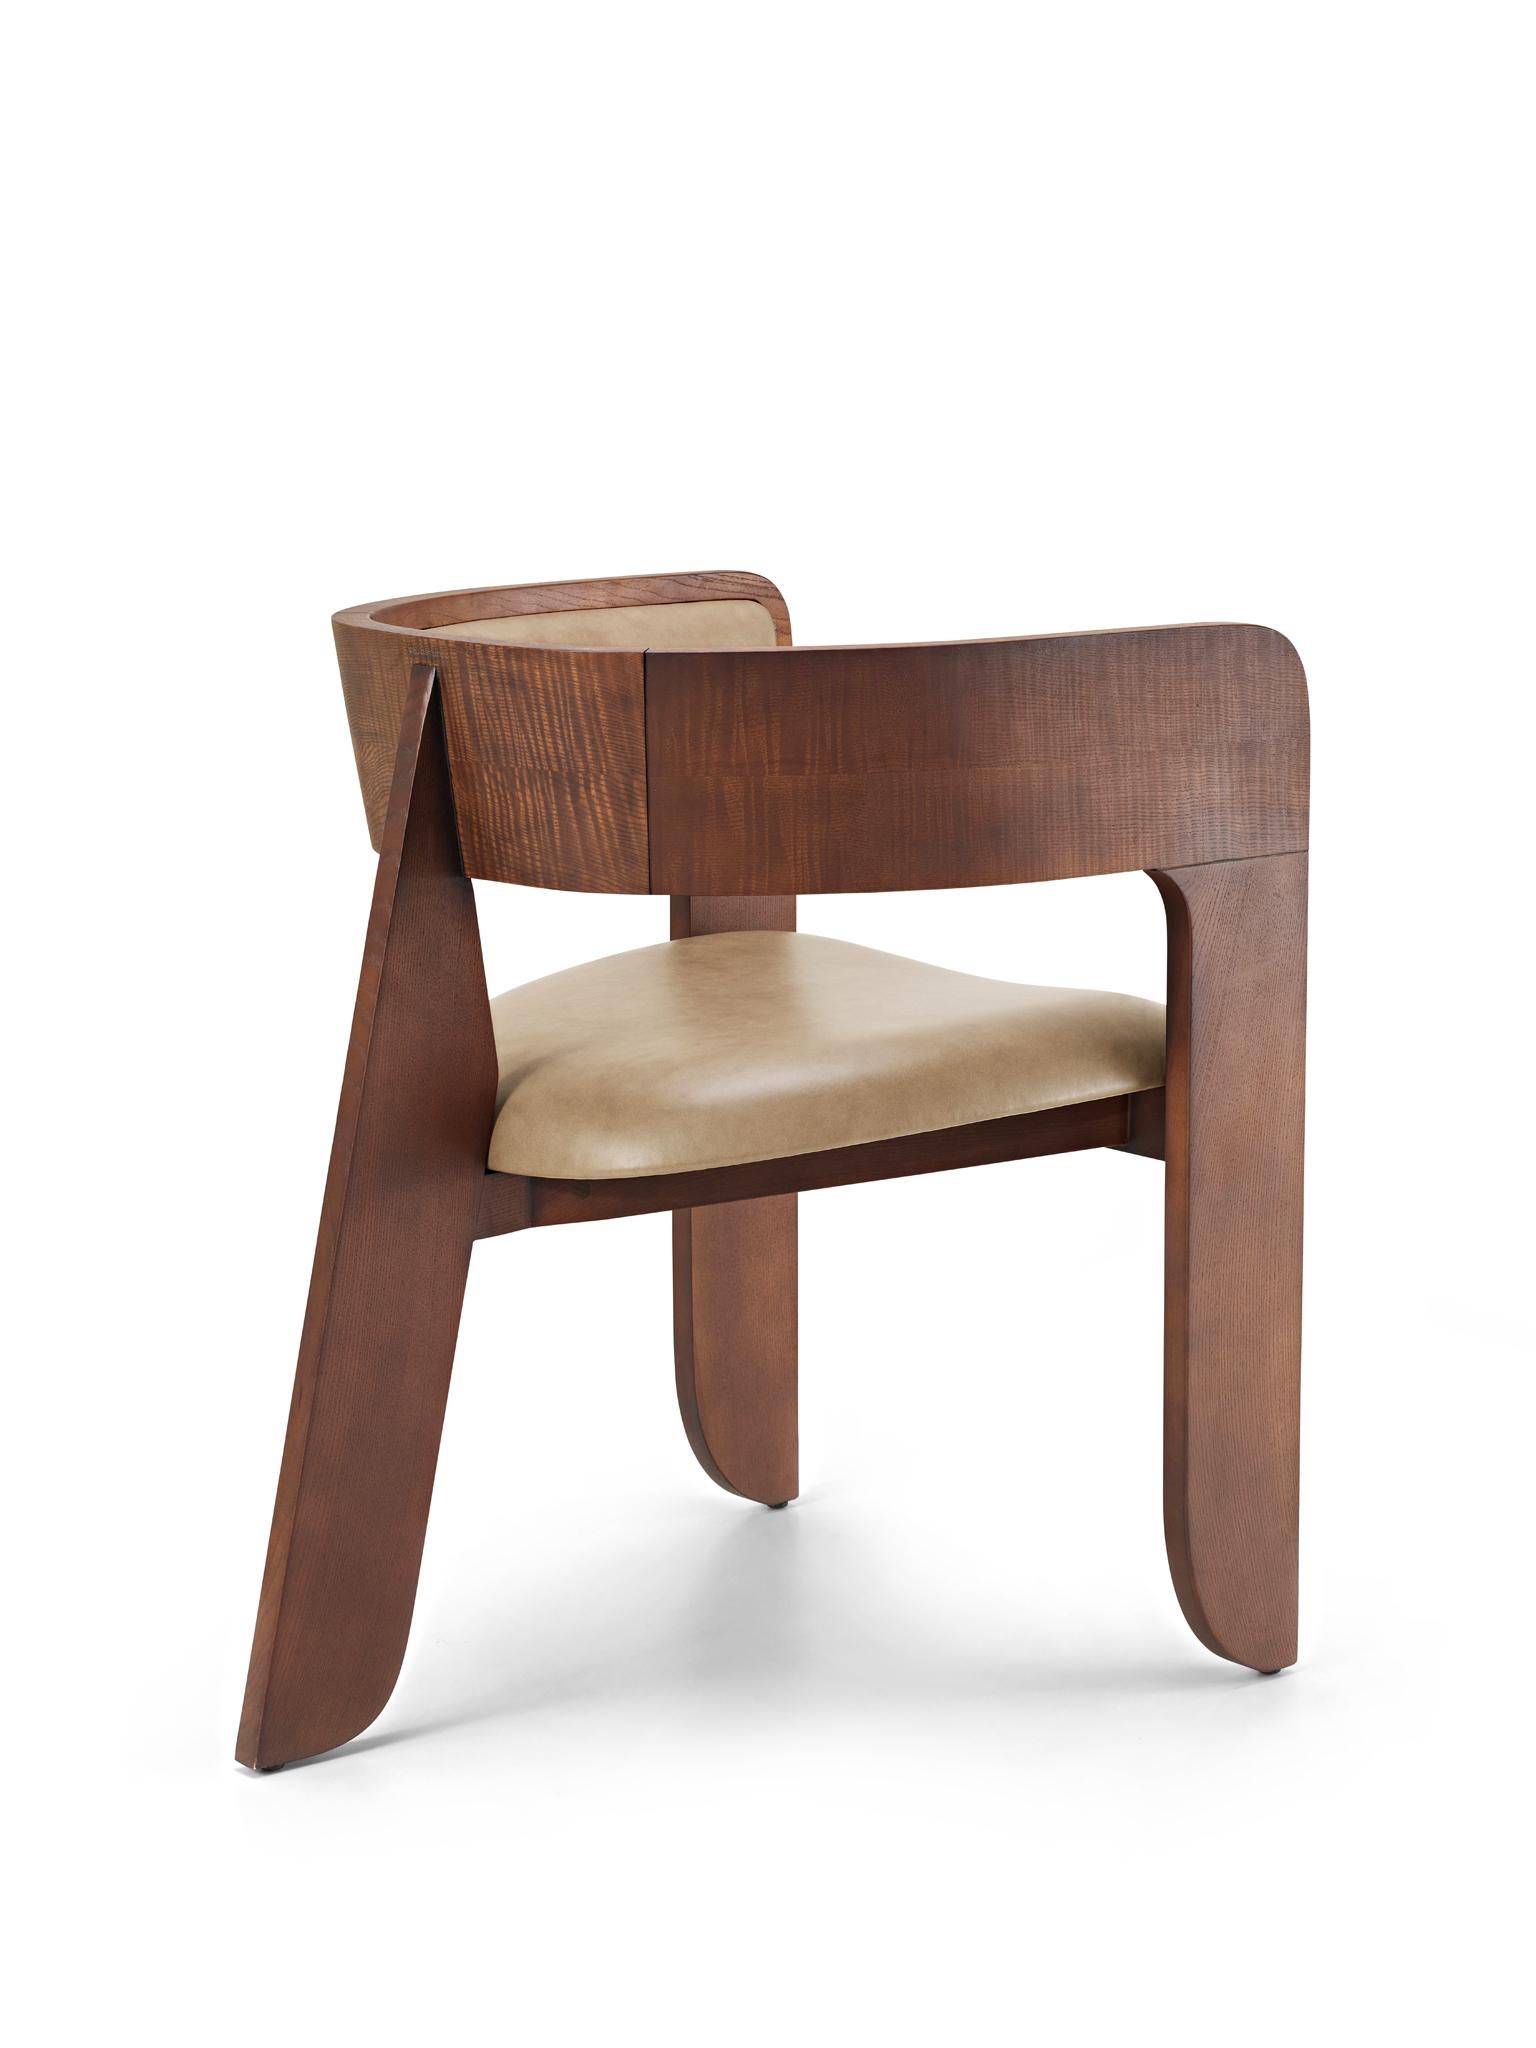 Inspired by the Standard chair by Jean Prouvé, and as an ode to the author itself, Jean is a chair that honours the past by looking to the future. Using the iconic back leg shape and giving it a whole new shape, Jean can be defined as a fresh